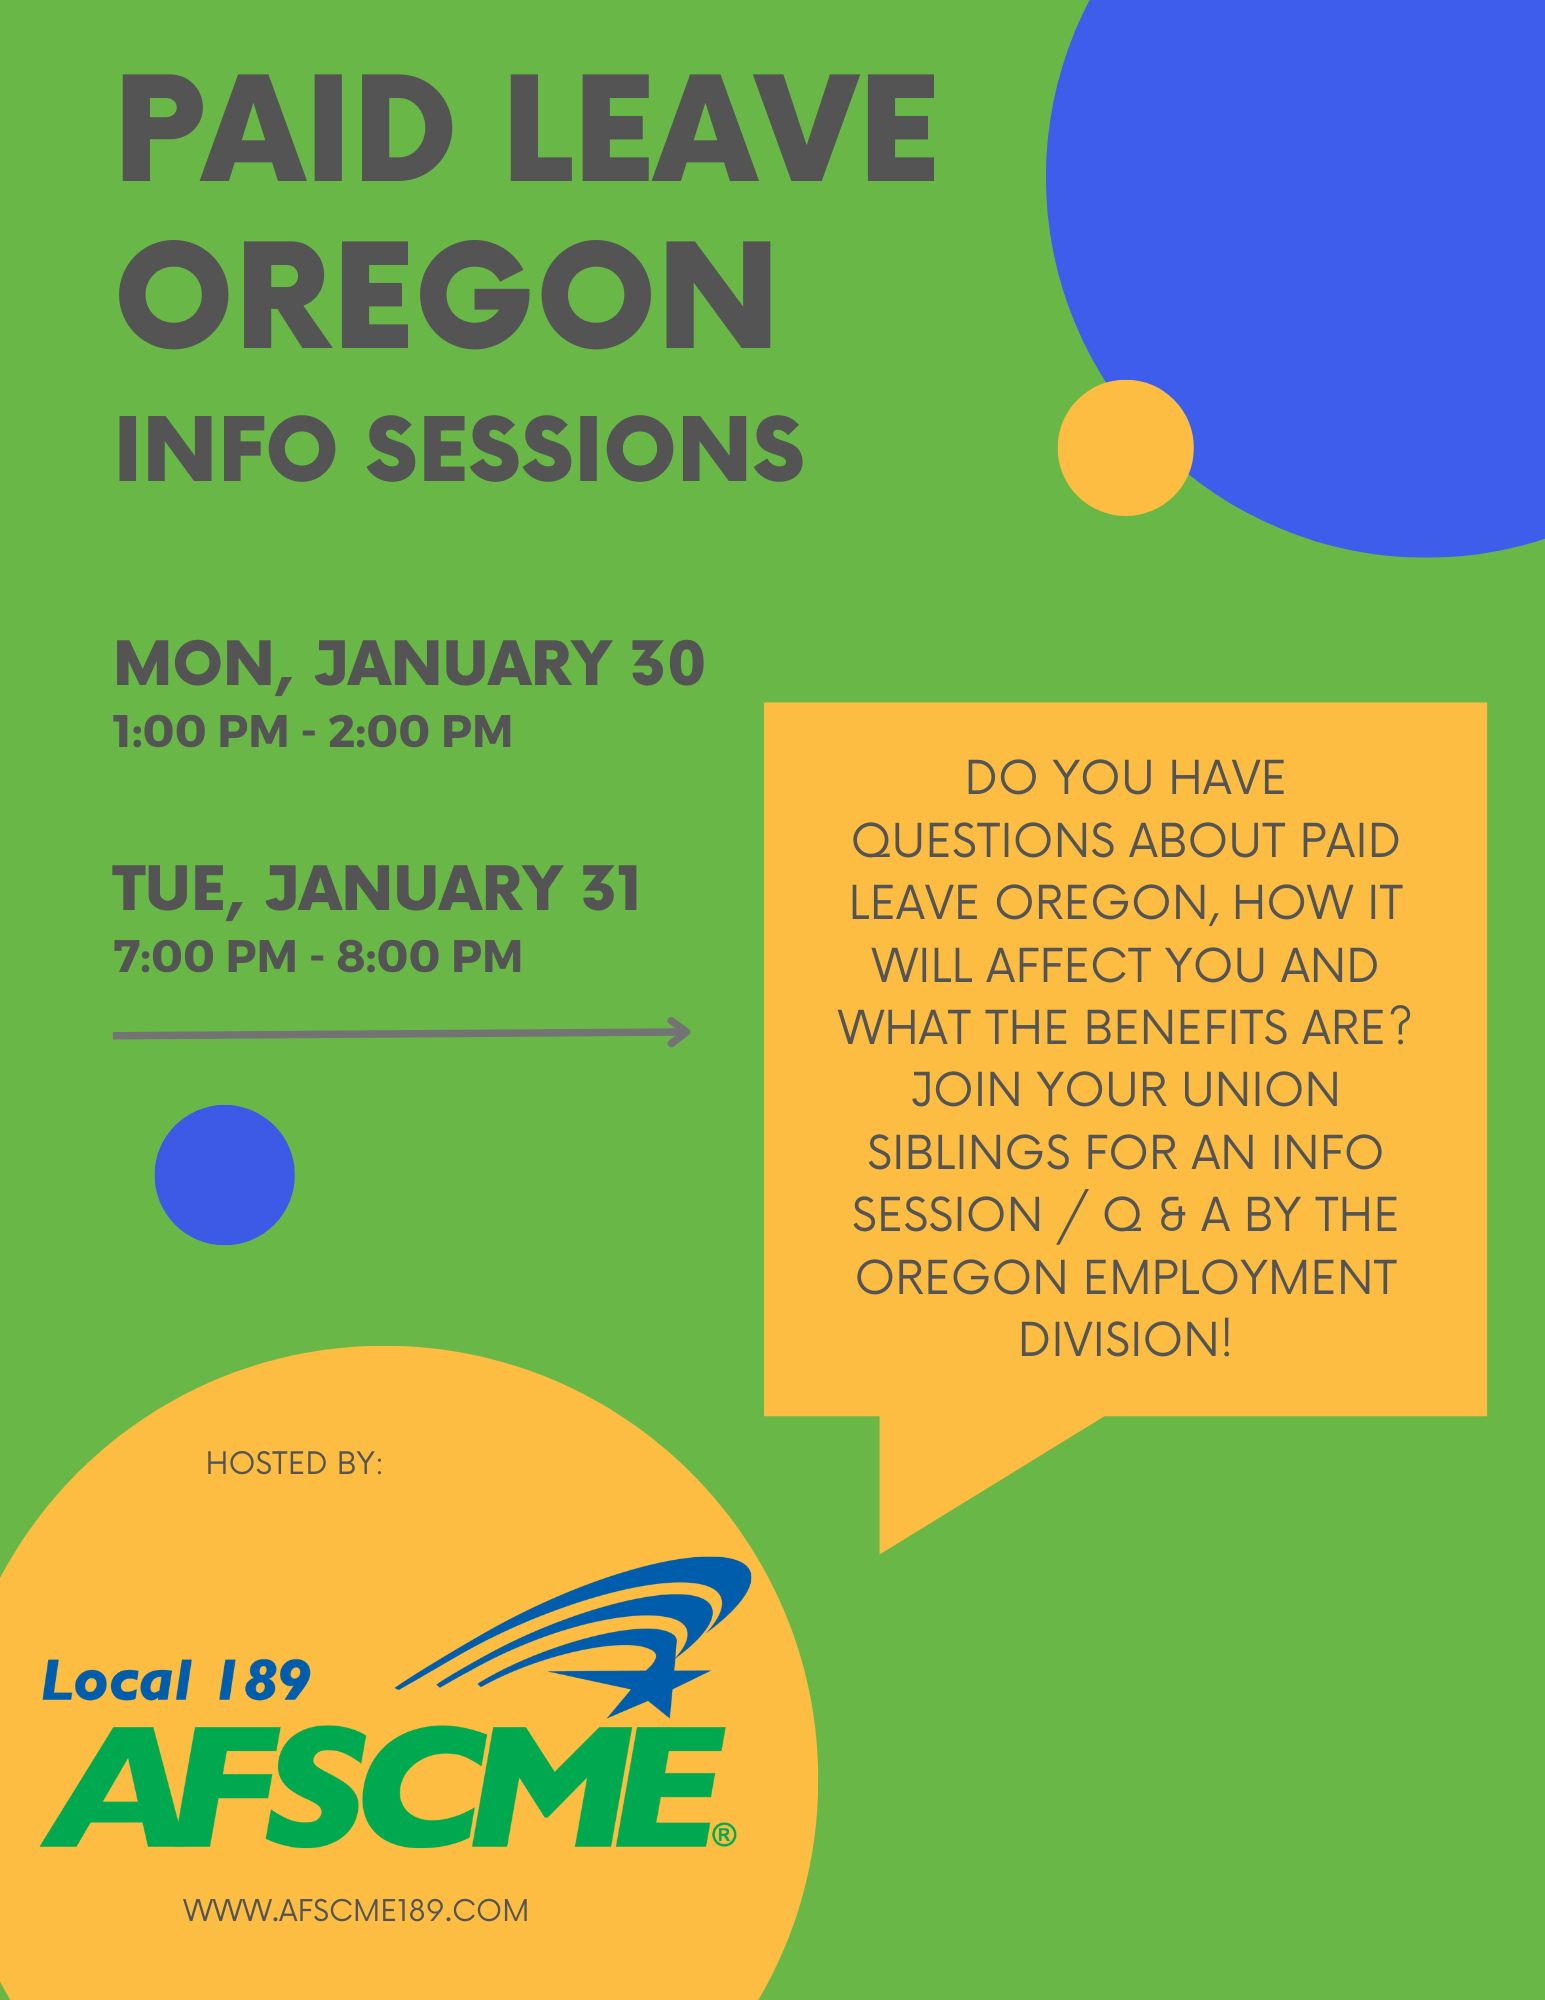 Colorful flyer that reads, "Paid Leave Oregon Info Sessions | Mon., Jan. 30 from 1 - 2 p.m. and Tues., Jan. 31 from 7 - 8 p.m. | Do you have questions about Paid Leave Oregon, how it will affect you and what your benefits are? Join your union siblings for an info session / Q&A by the Oregon Employment Division! | Hosted by Local 189 AFSCME | www.AFSCME189.com"